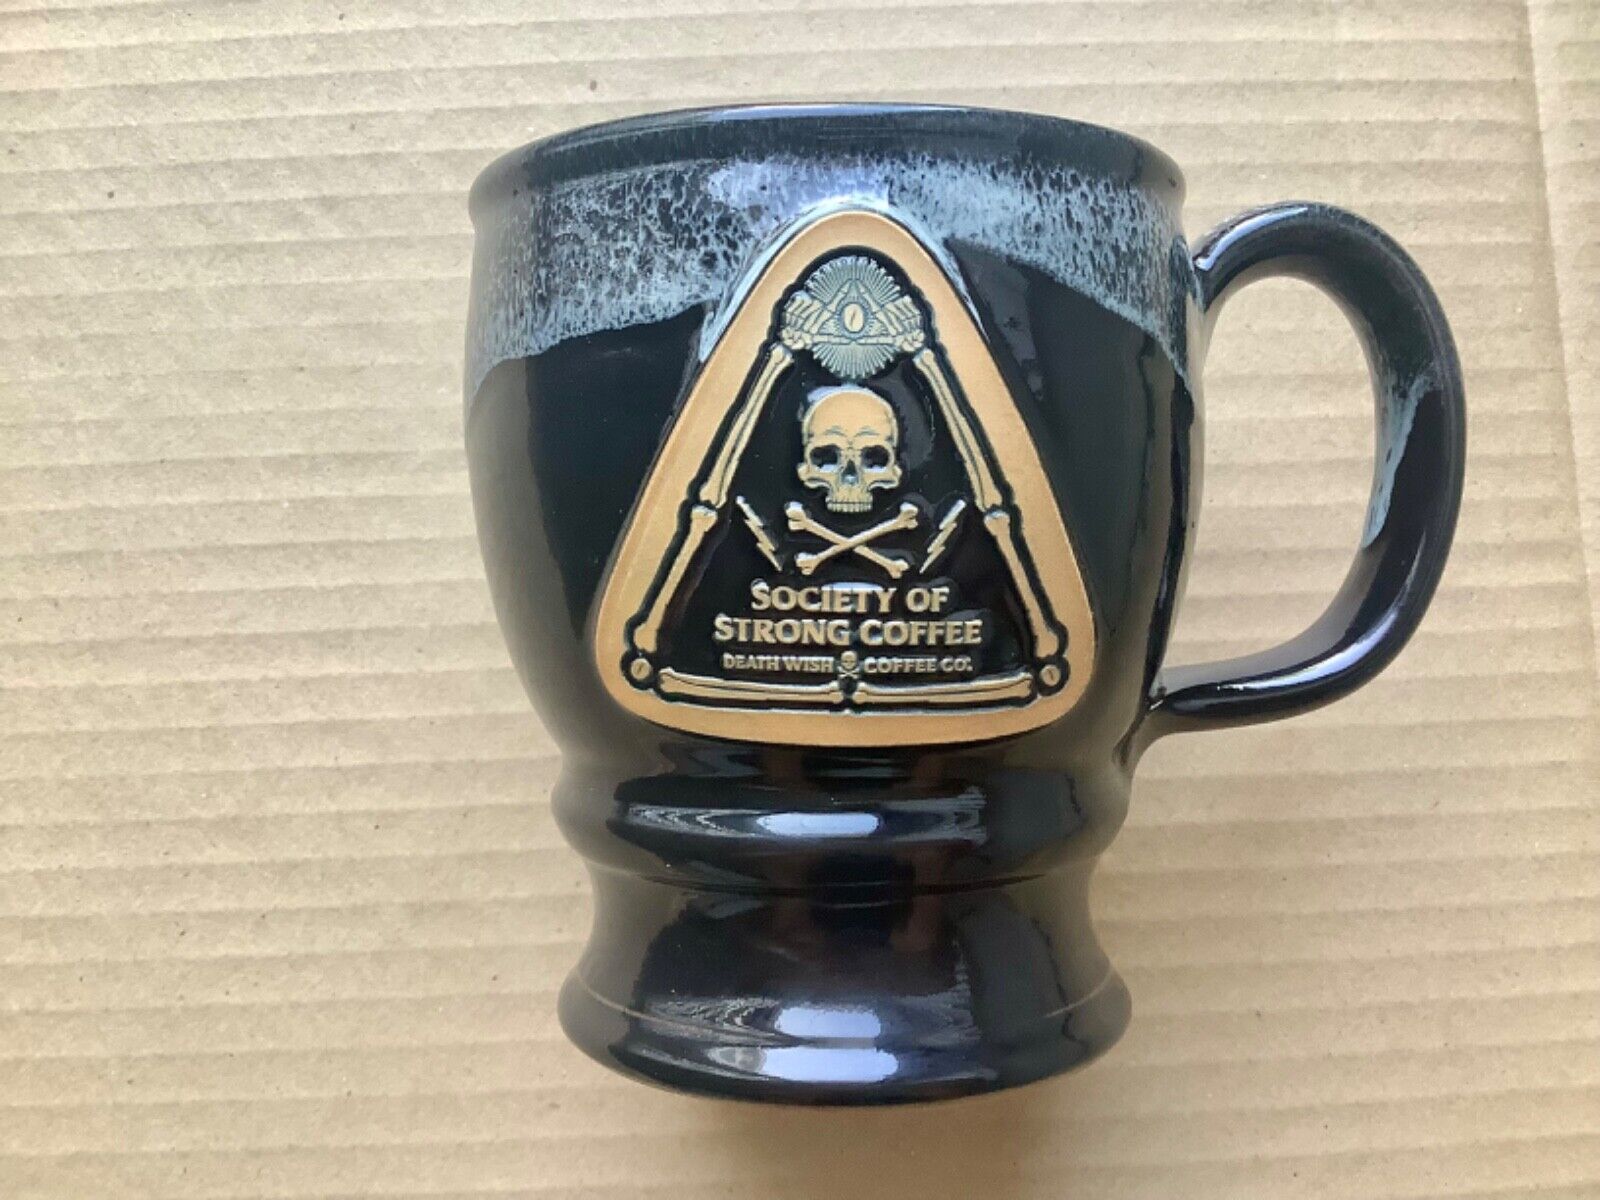 death wish coffee society of strong mug deneen pottery exclusive collectibles 